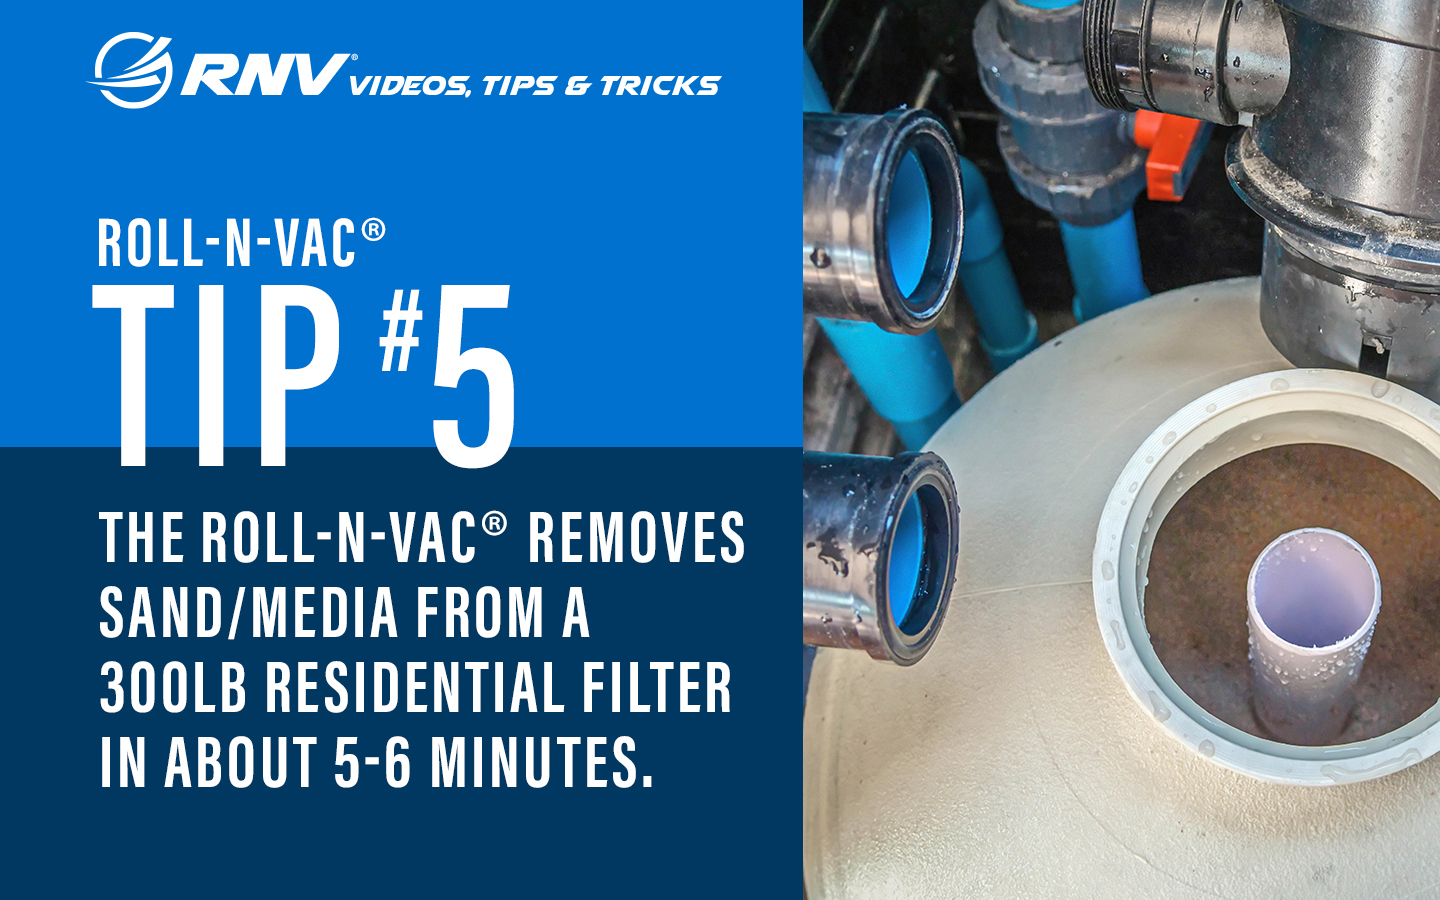 Roll-n-vac Tip #5  The Roll-n-Vac removes sand/media from a 300lb residential filter in about 5-6 minutes